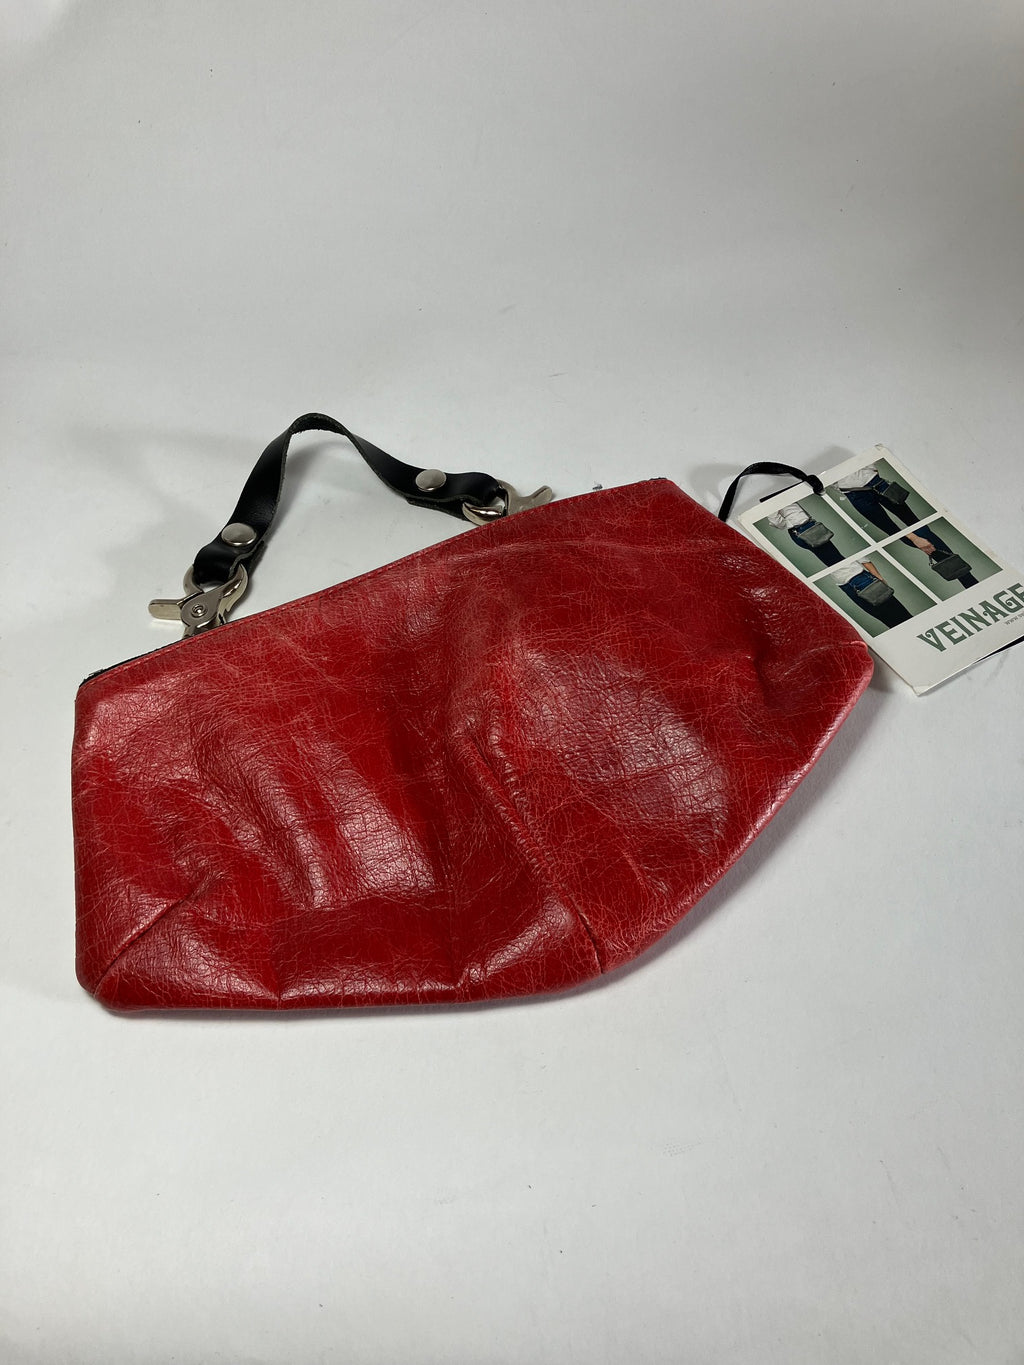 SAMPLE red leather fannypack, belt bag, pouch